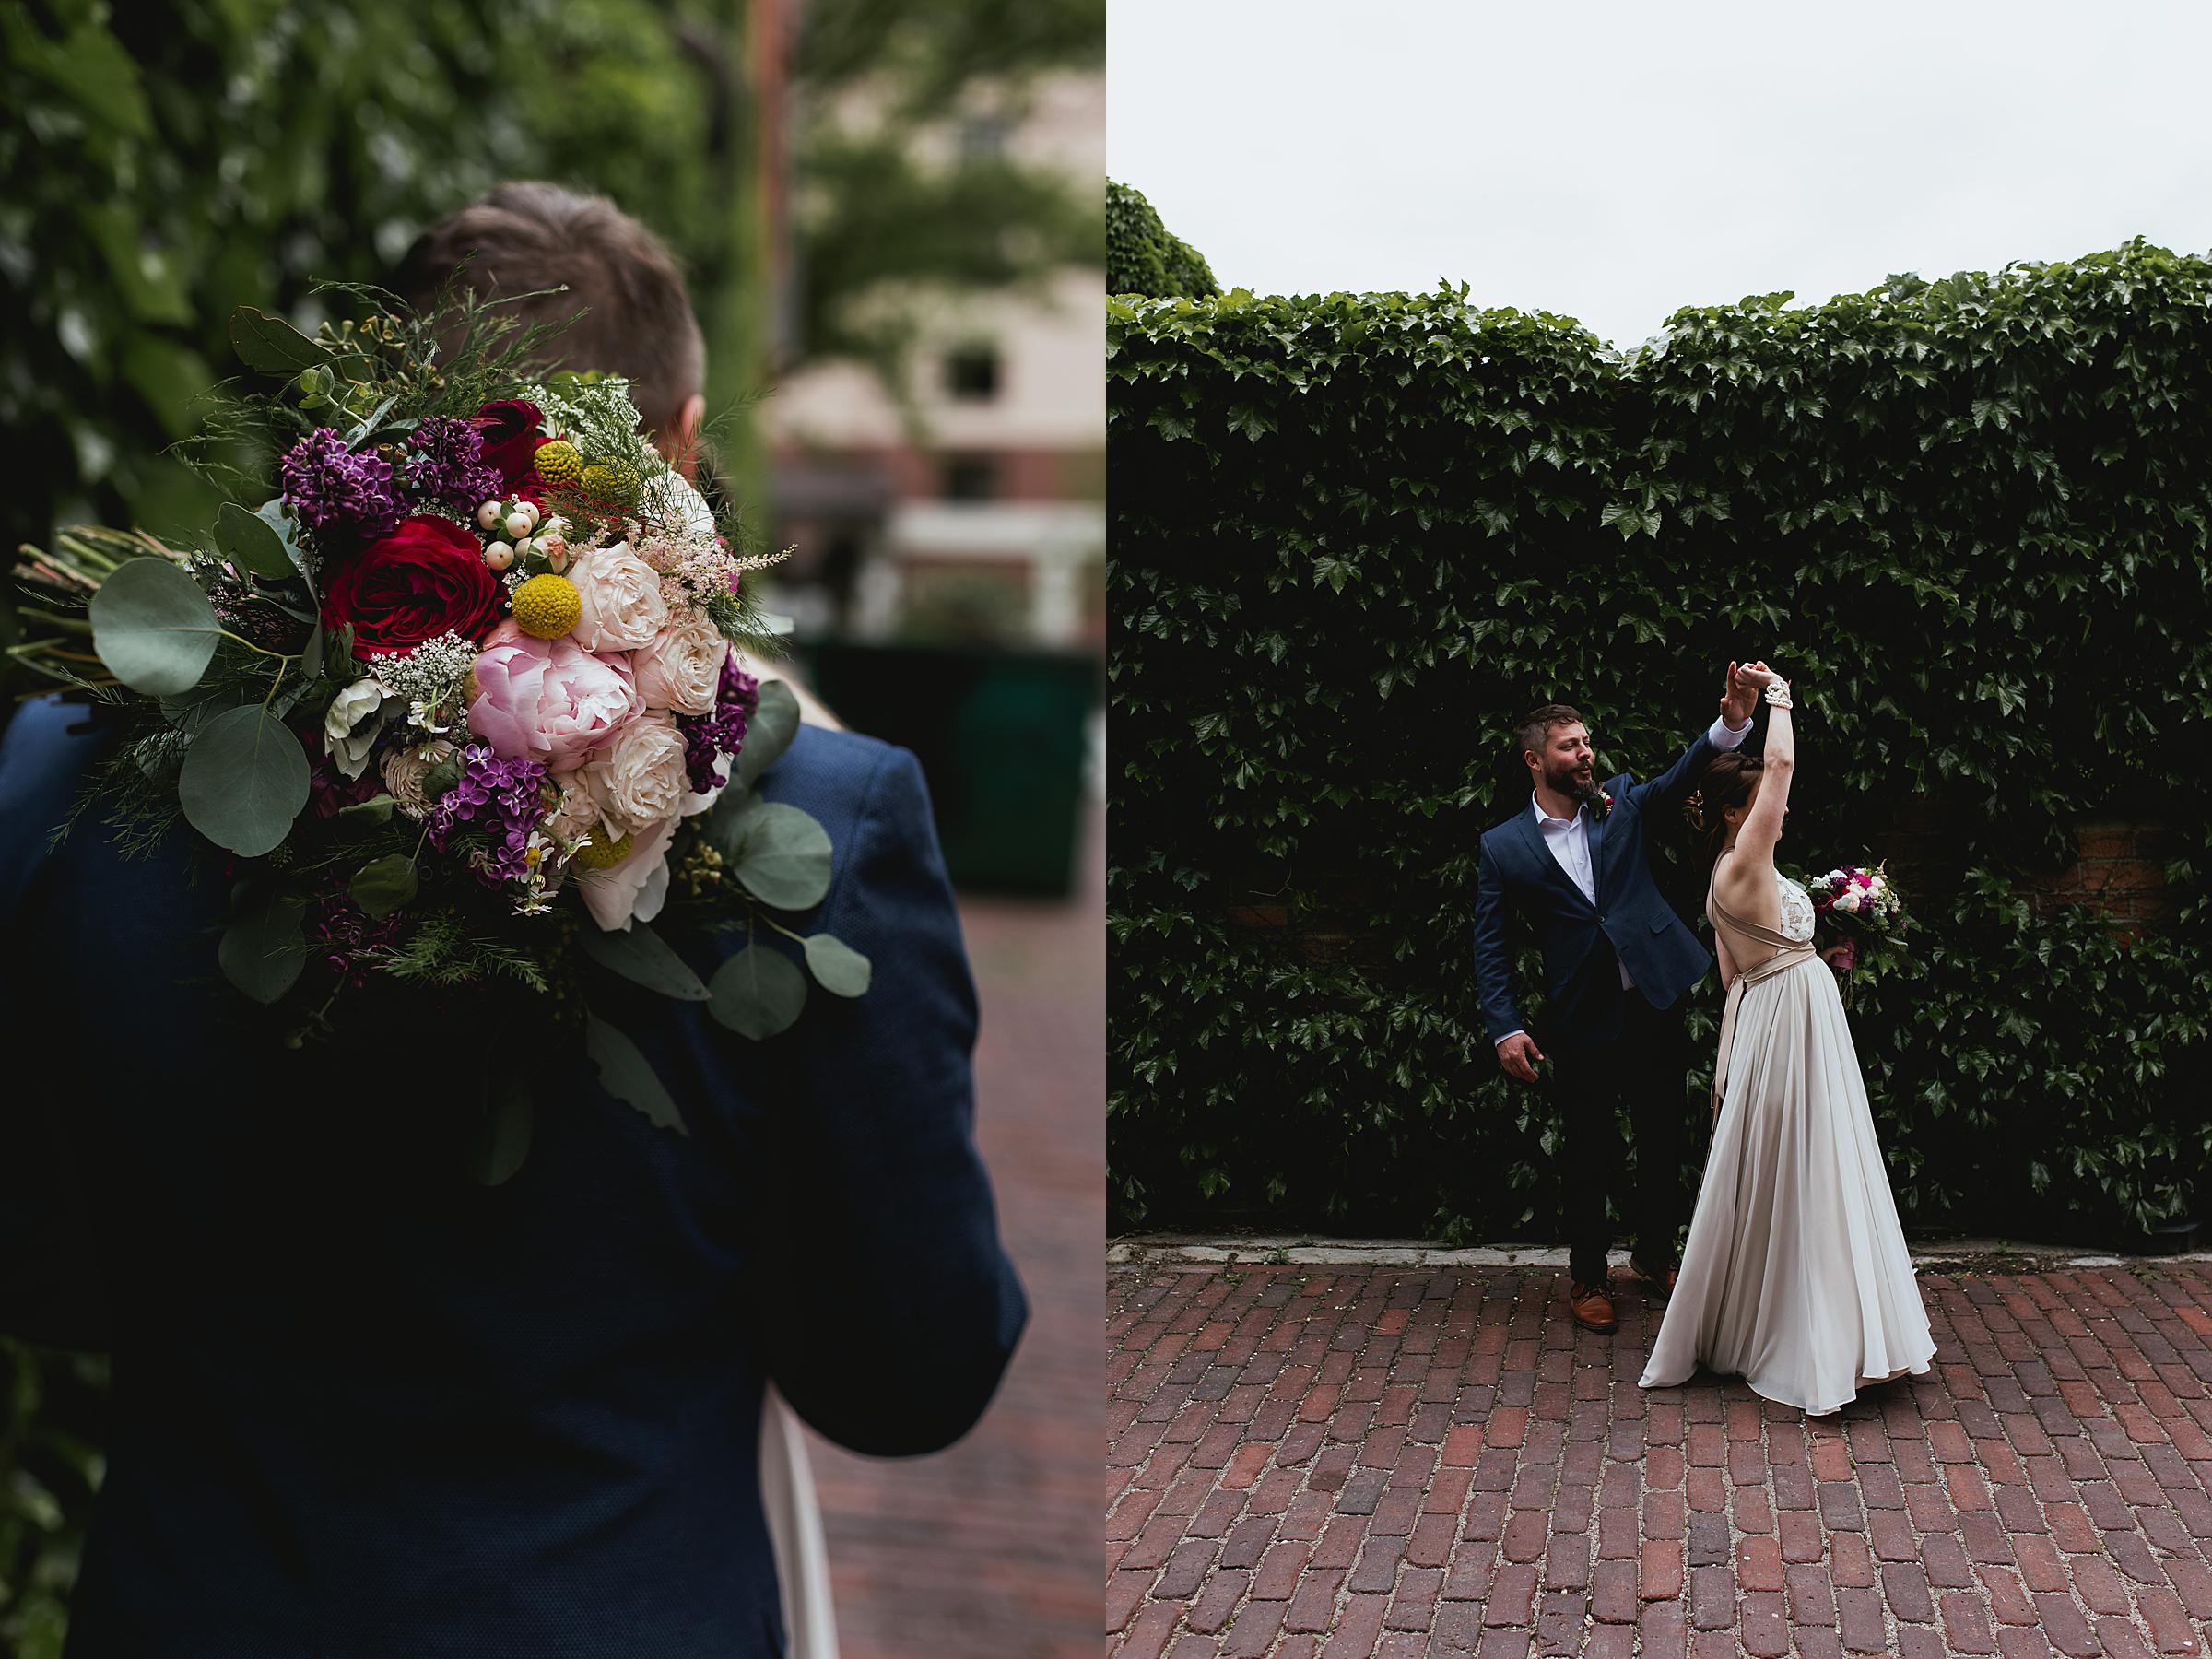 Omaha Wedding; Bridal & Groom Portraits in the Old Market; Florals by One & Only; Photographed by Juliana Montane Photography